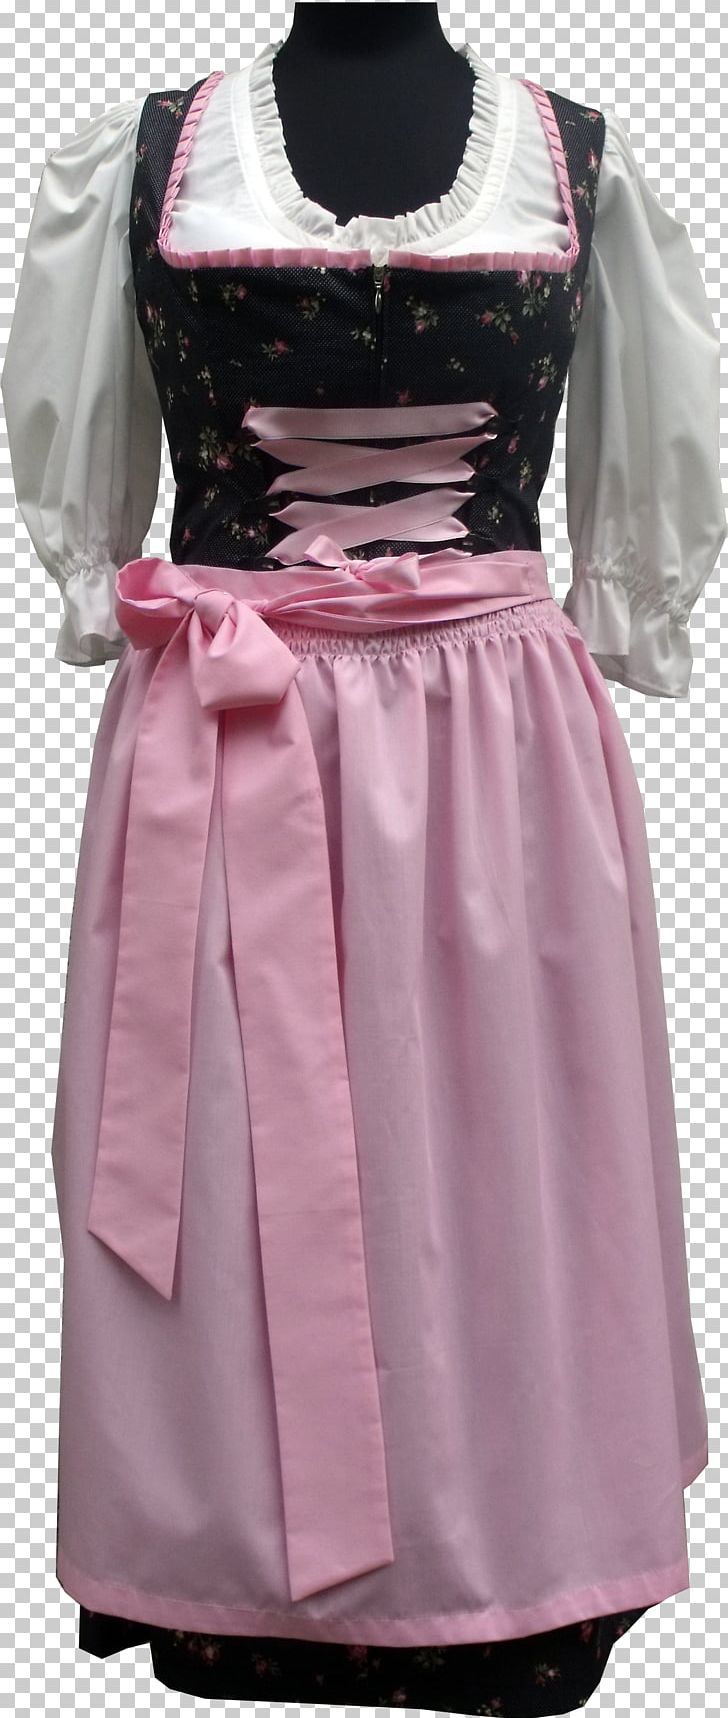 Cocktail Dress Clothing Folk Costume PNG, Clipart, Ancestor, Clothing, Cocktail, Cocktail Dress, Costume Free PNG Download